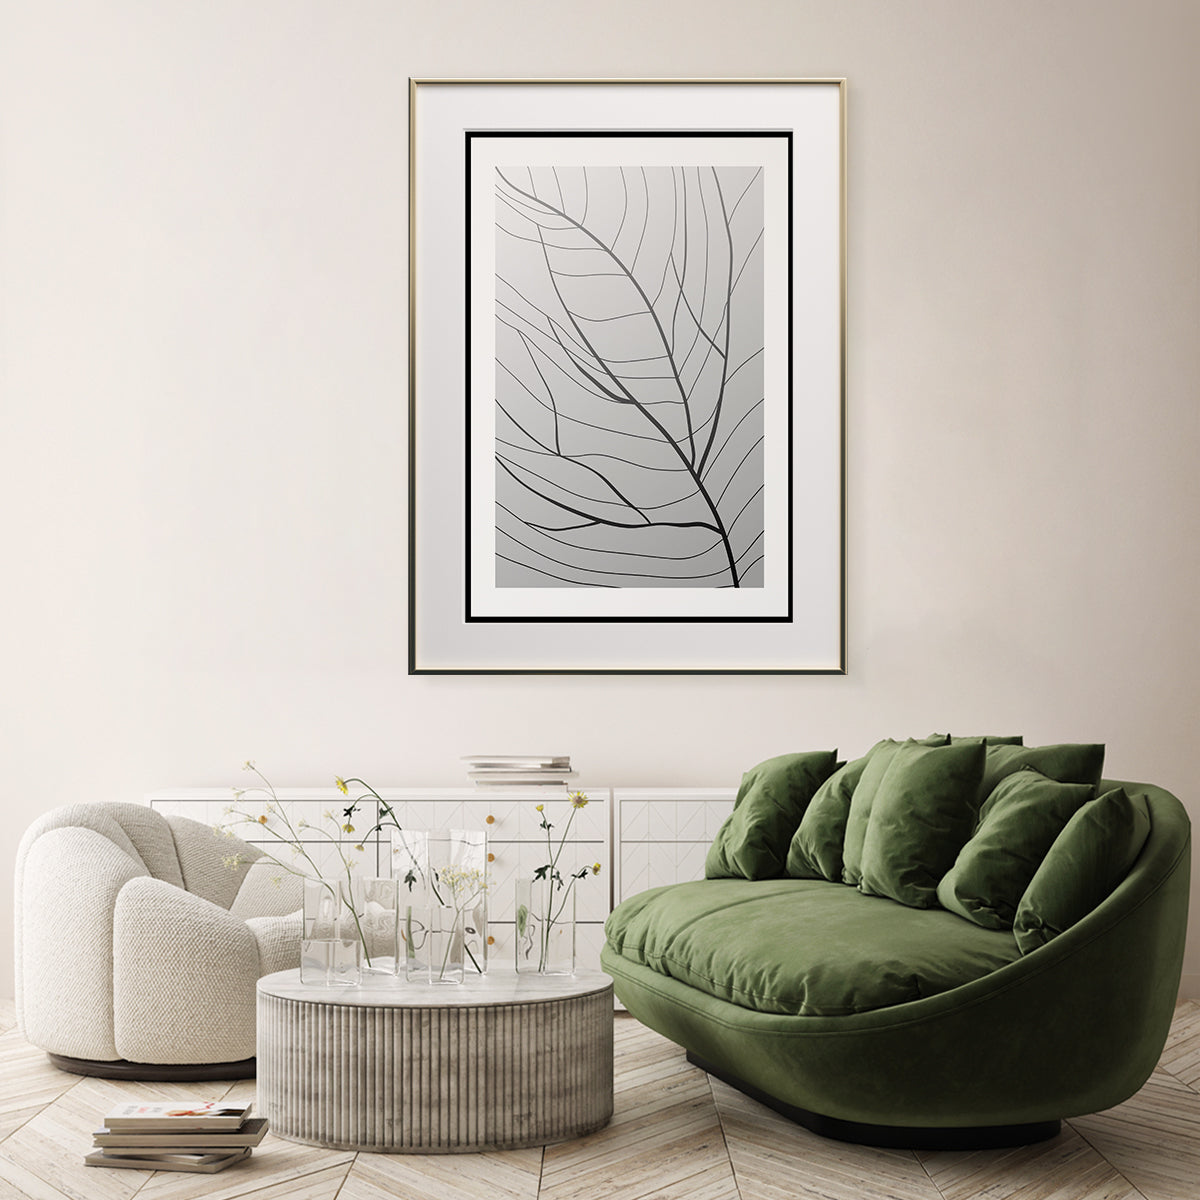 Abstract Branch Line Art in Black White Posters For Room-Vertical Posters NOT FRAMED-CetArt-8″x10″ inches-CetArt